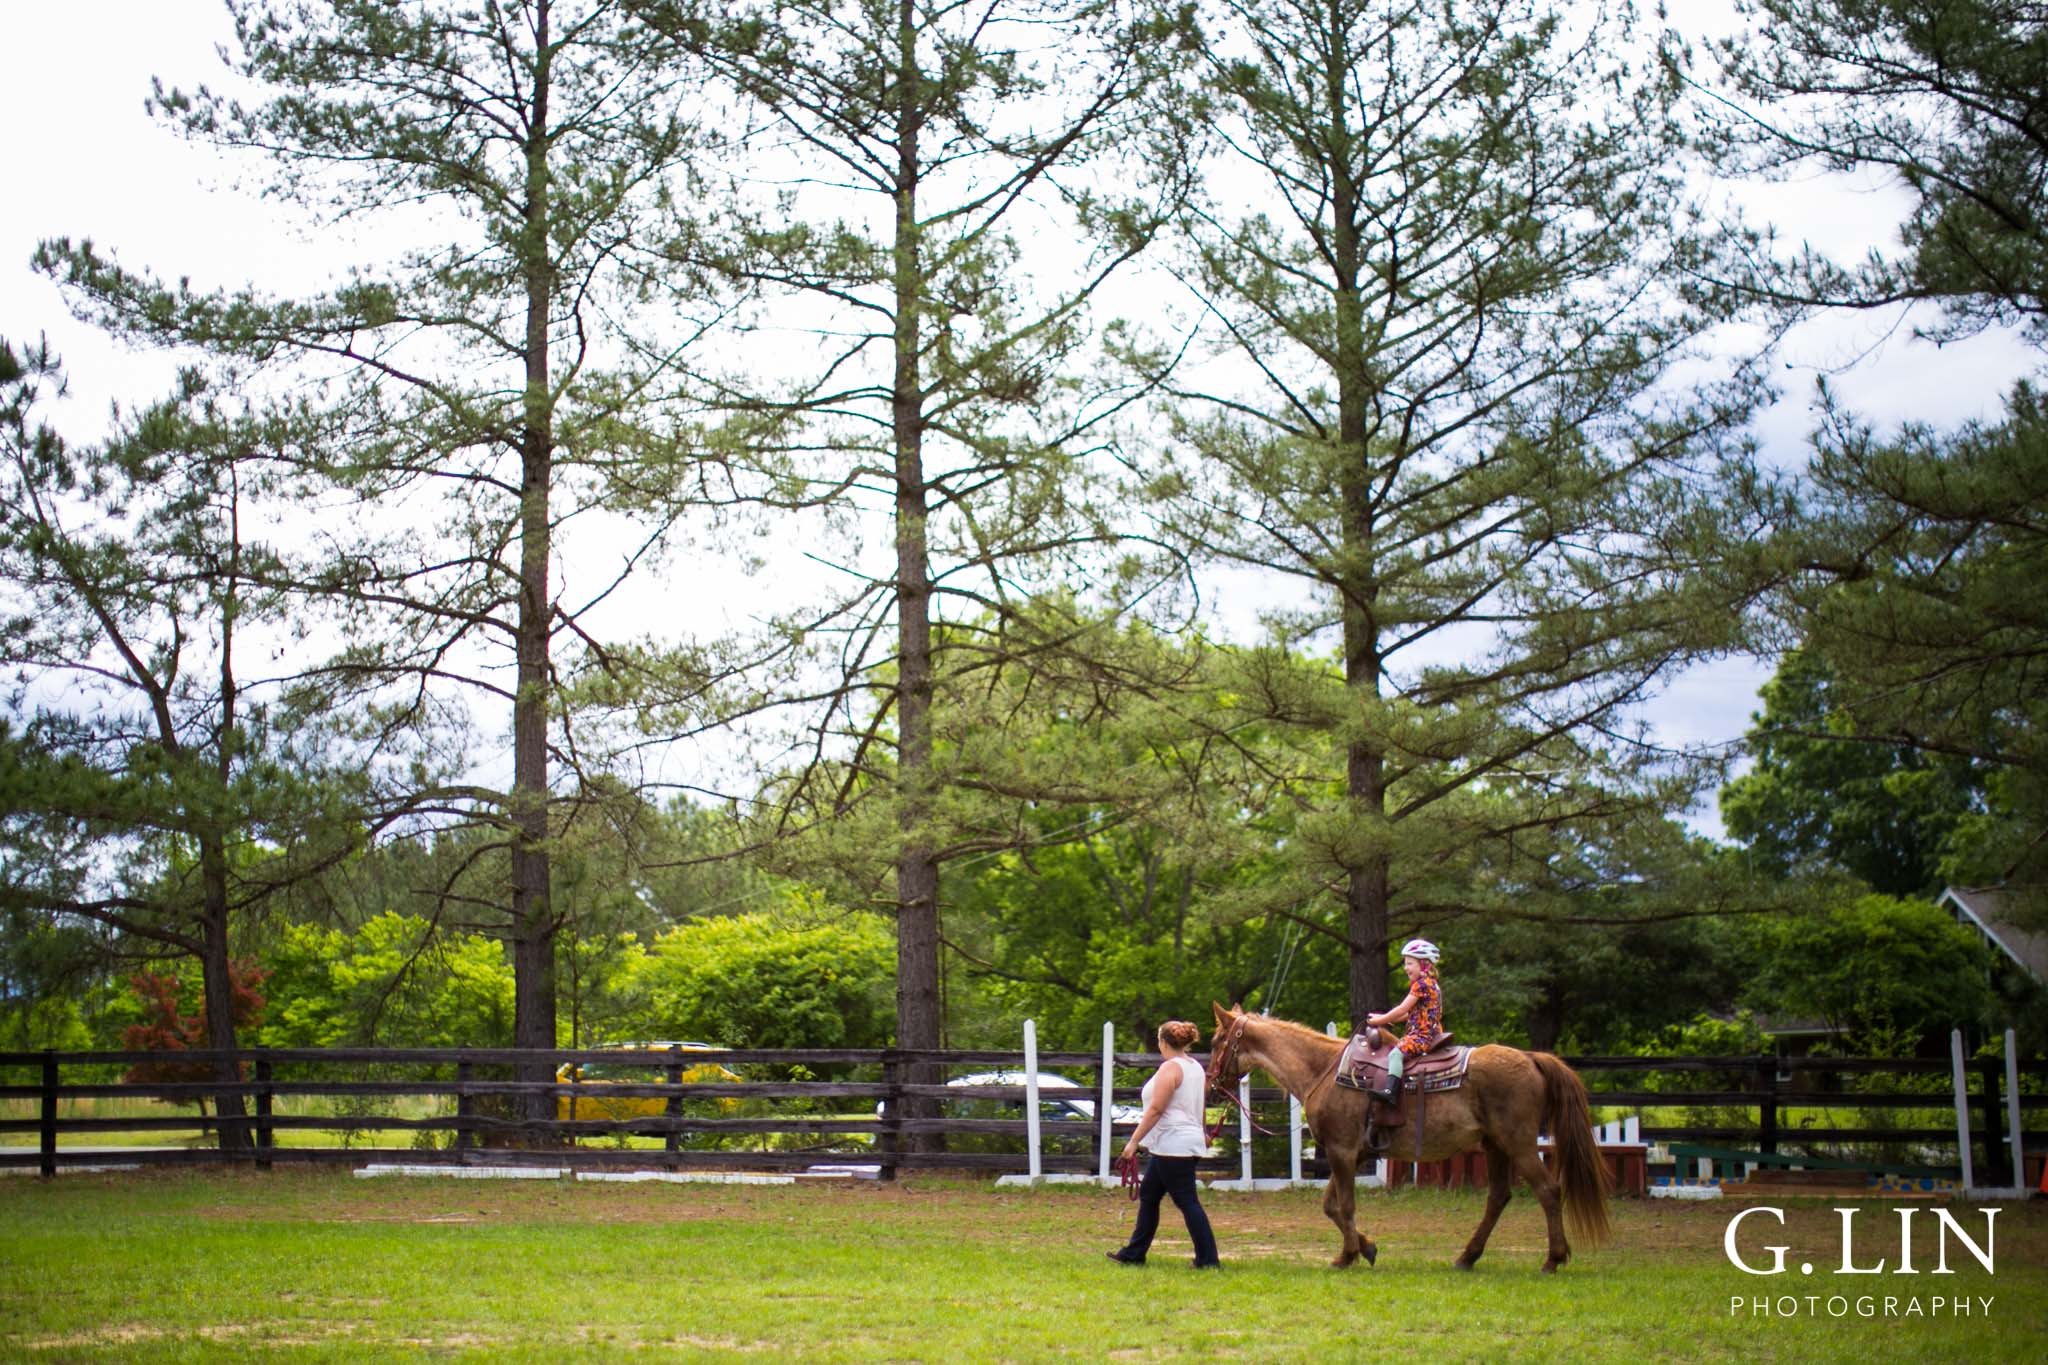 G. Lin Photography | Raleigh Event Photographer | Trainer leading girl and horse around the field